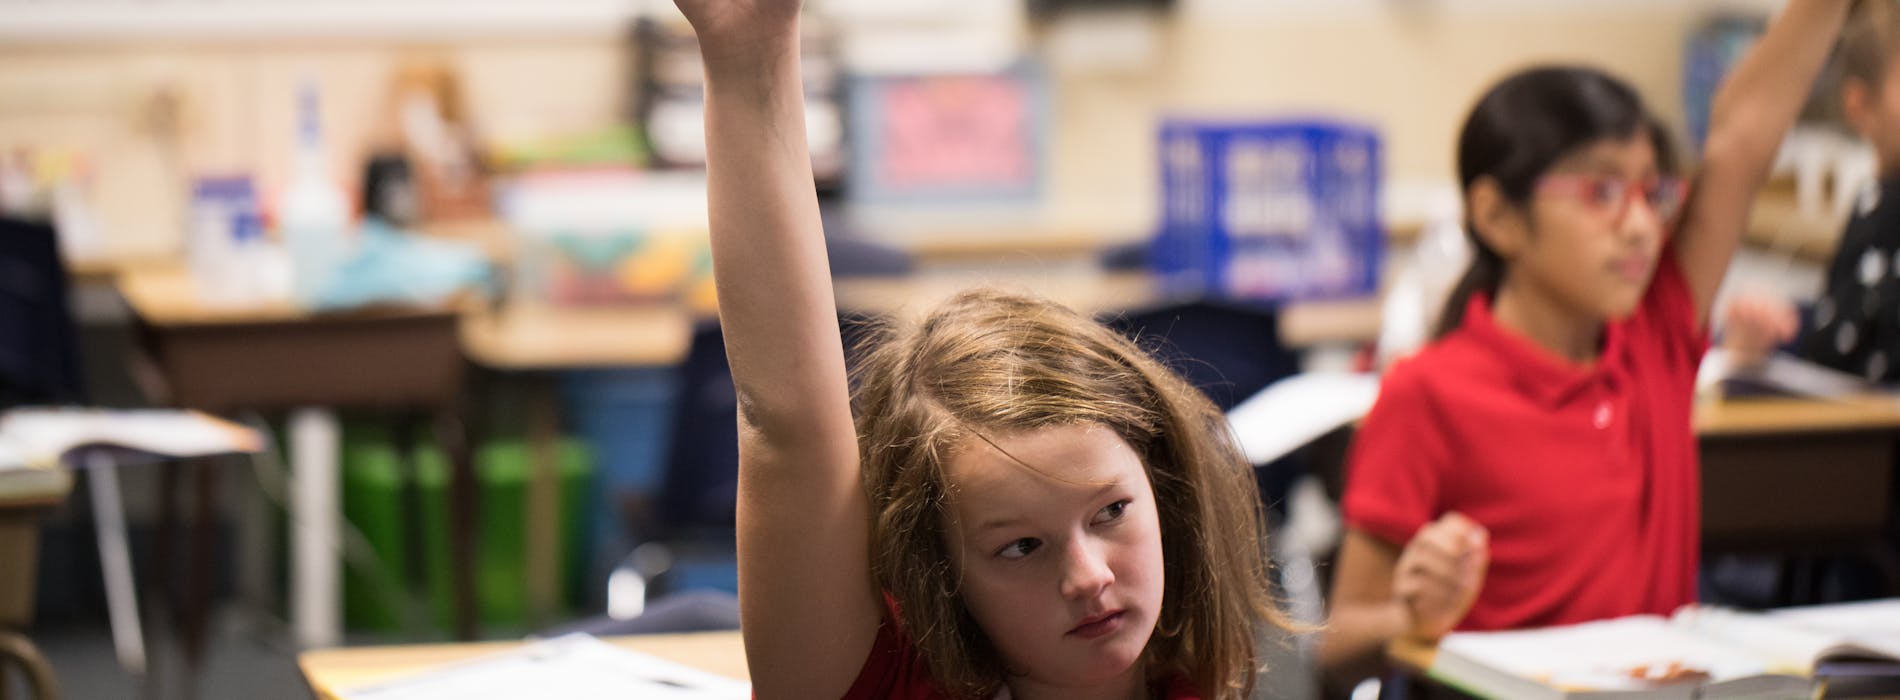  Payette Students raising their hands in class. 